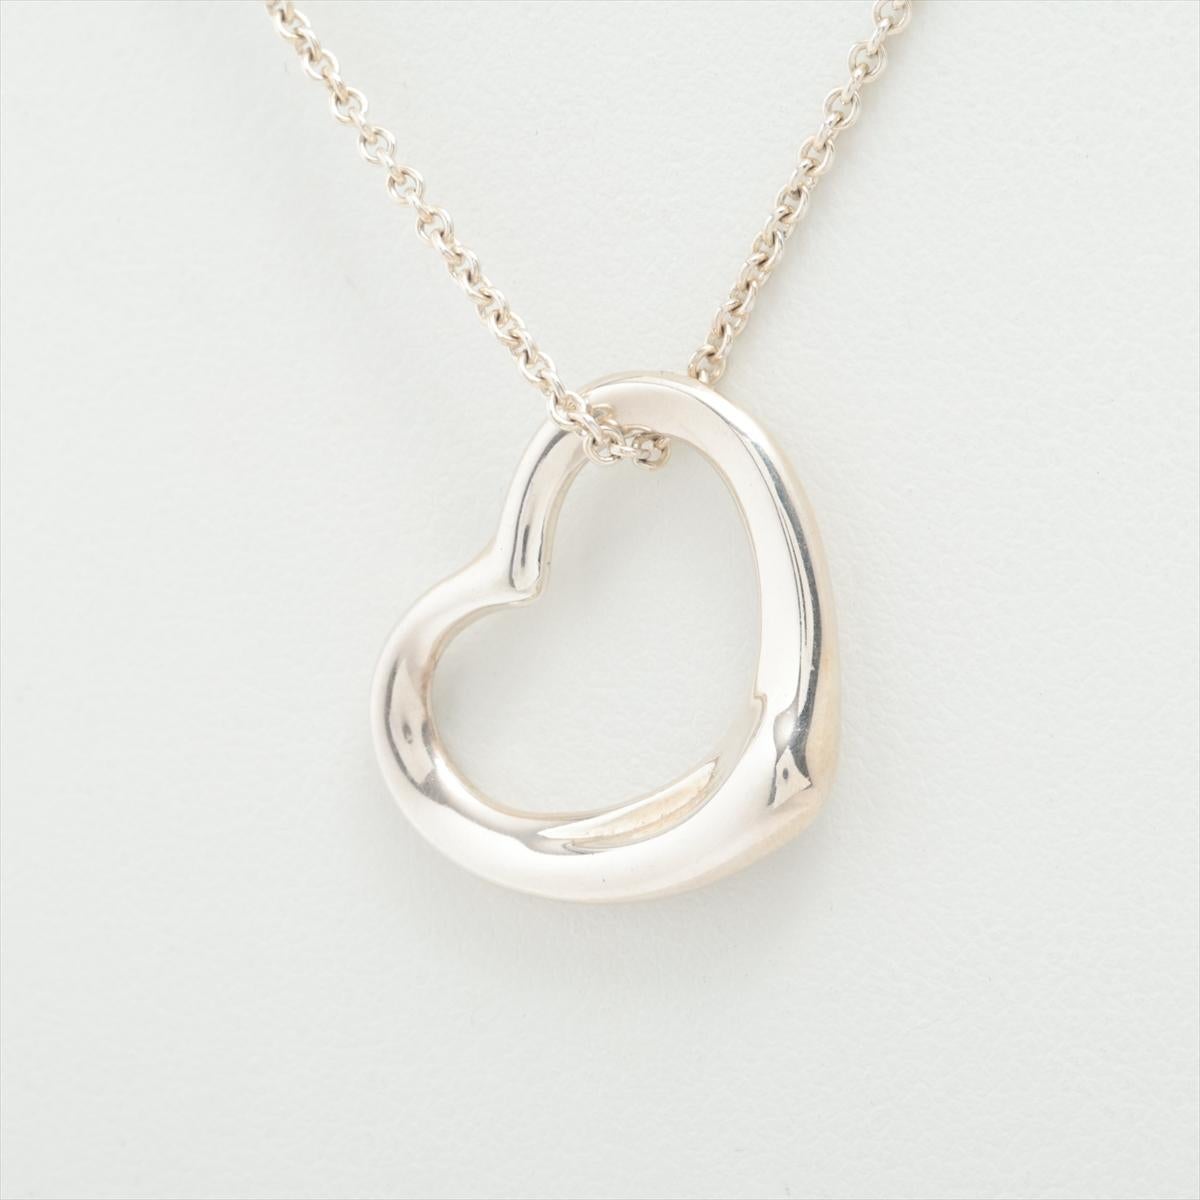 The Tiffany & Co. Open Heart Elsa Peretti Necklace in Silver is a timeless and elegant piece of jewelry that exudes sophistication. Designed by renowned artist Elsa Peretti, the necklace features a delicate open heart pendant suspended from a fine